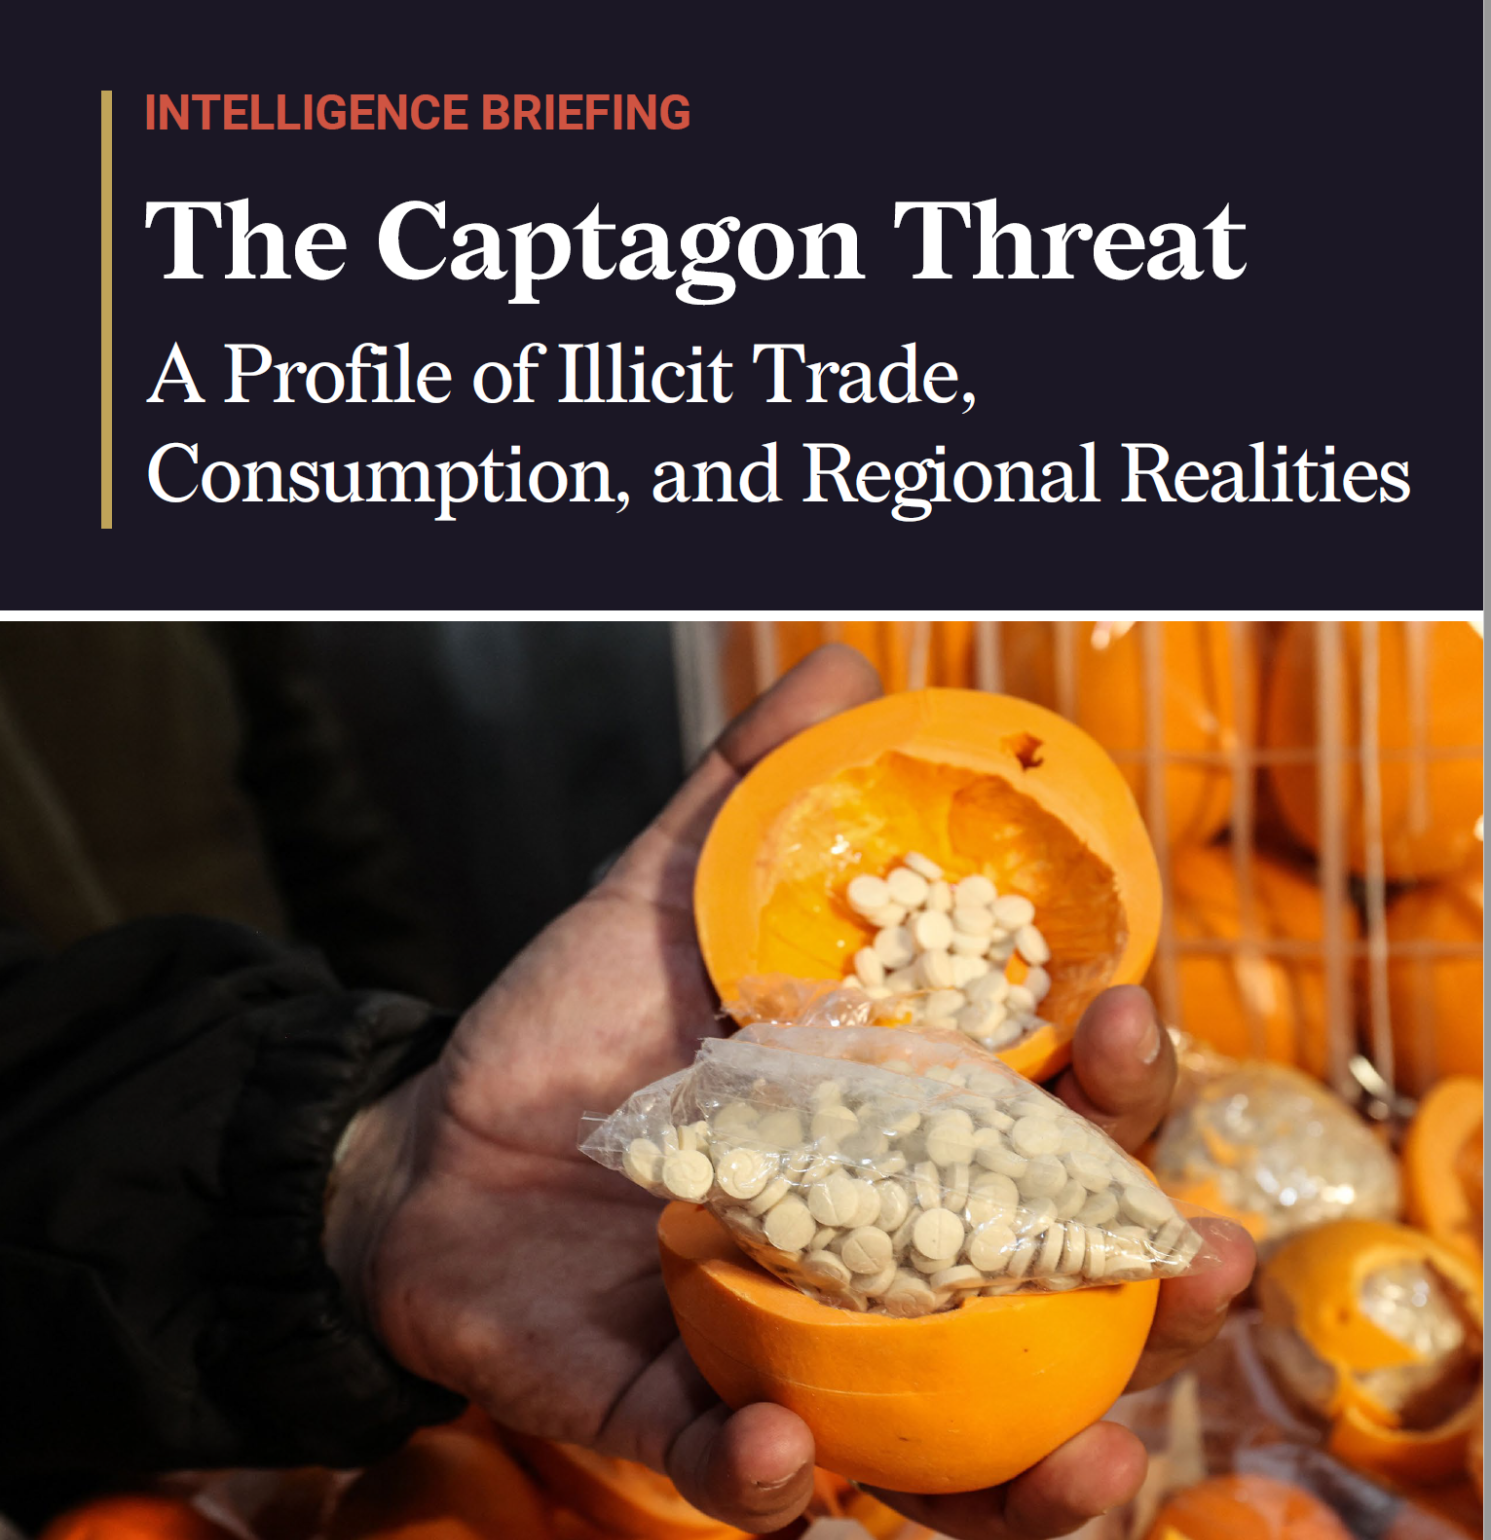 The Captagon Threat: A Profile of Illicit Trade, Consumption, and Regional Realities